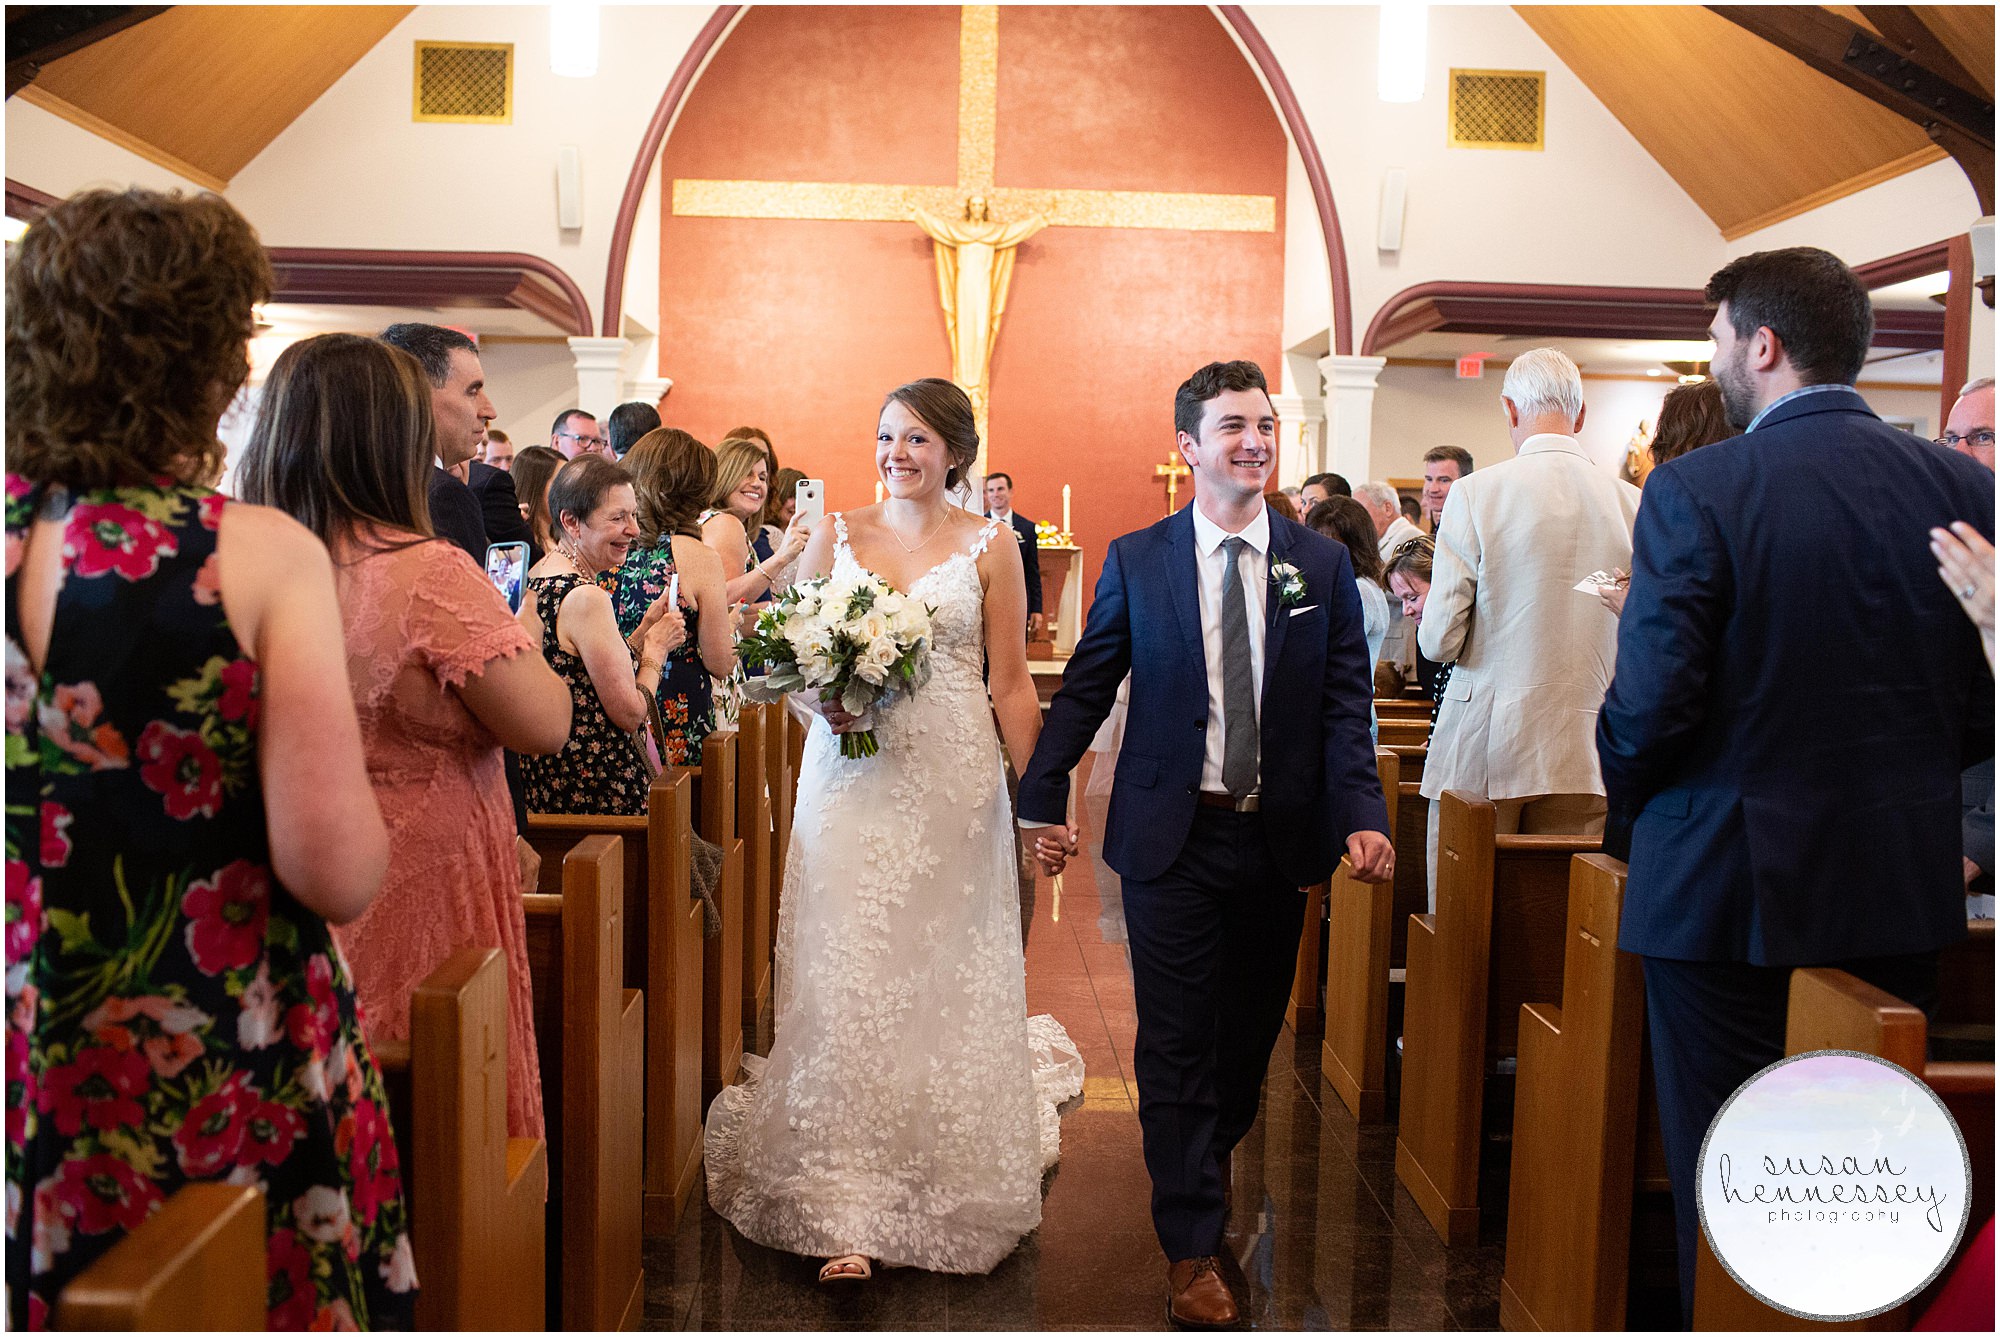 Bride and groom are officially married at Catholic wedding in Hamilton, NJ